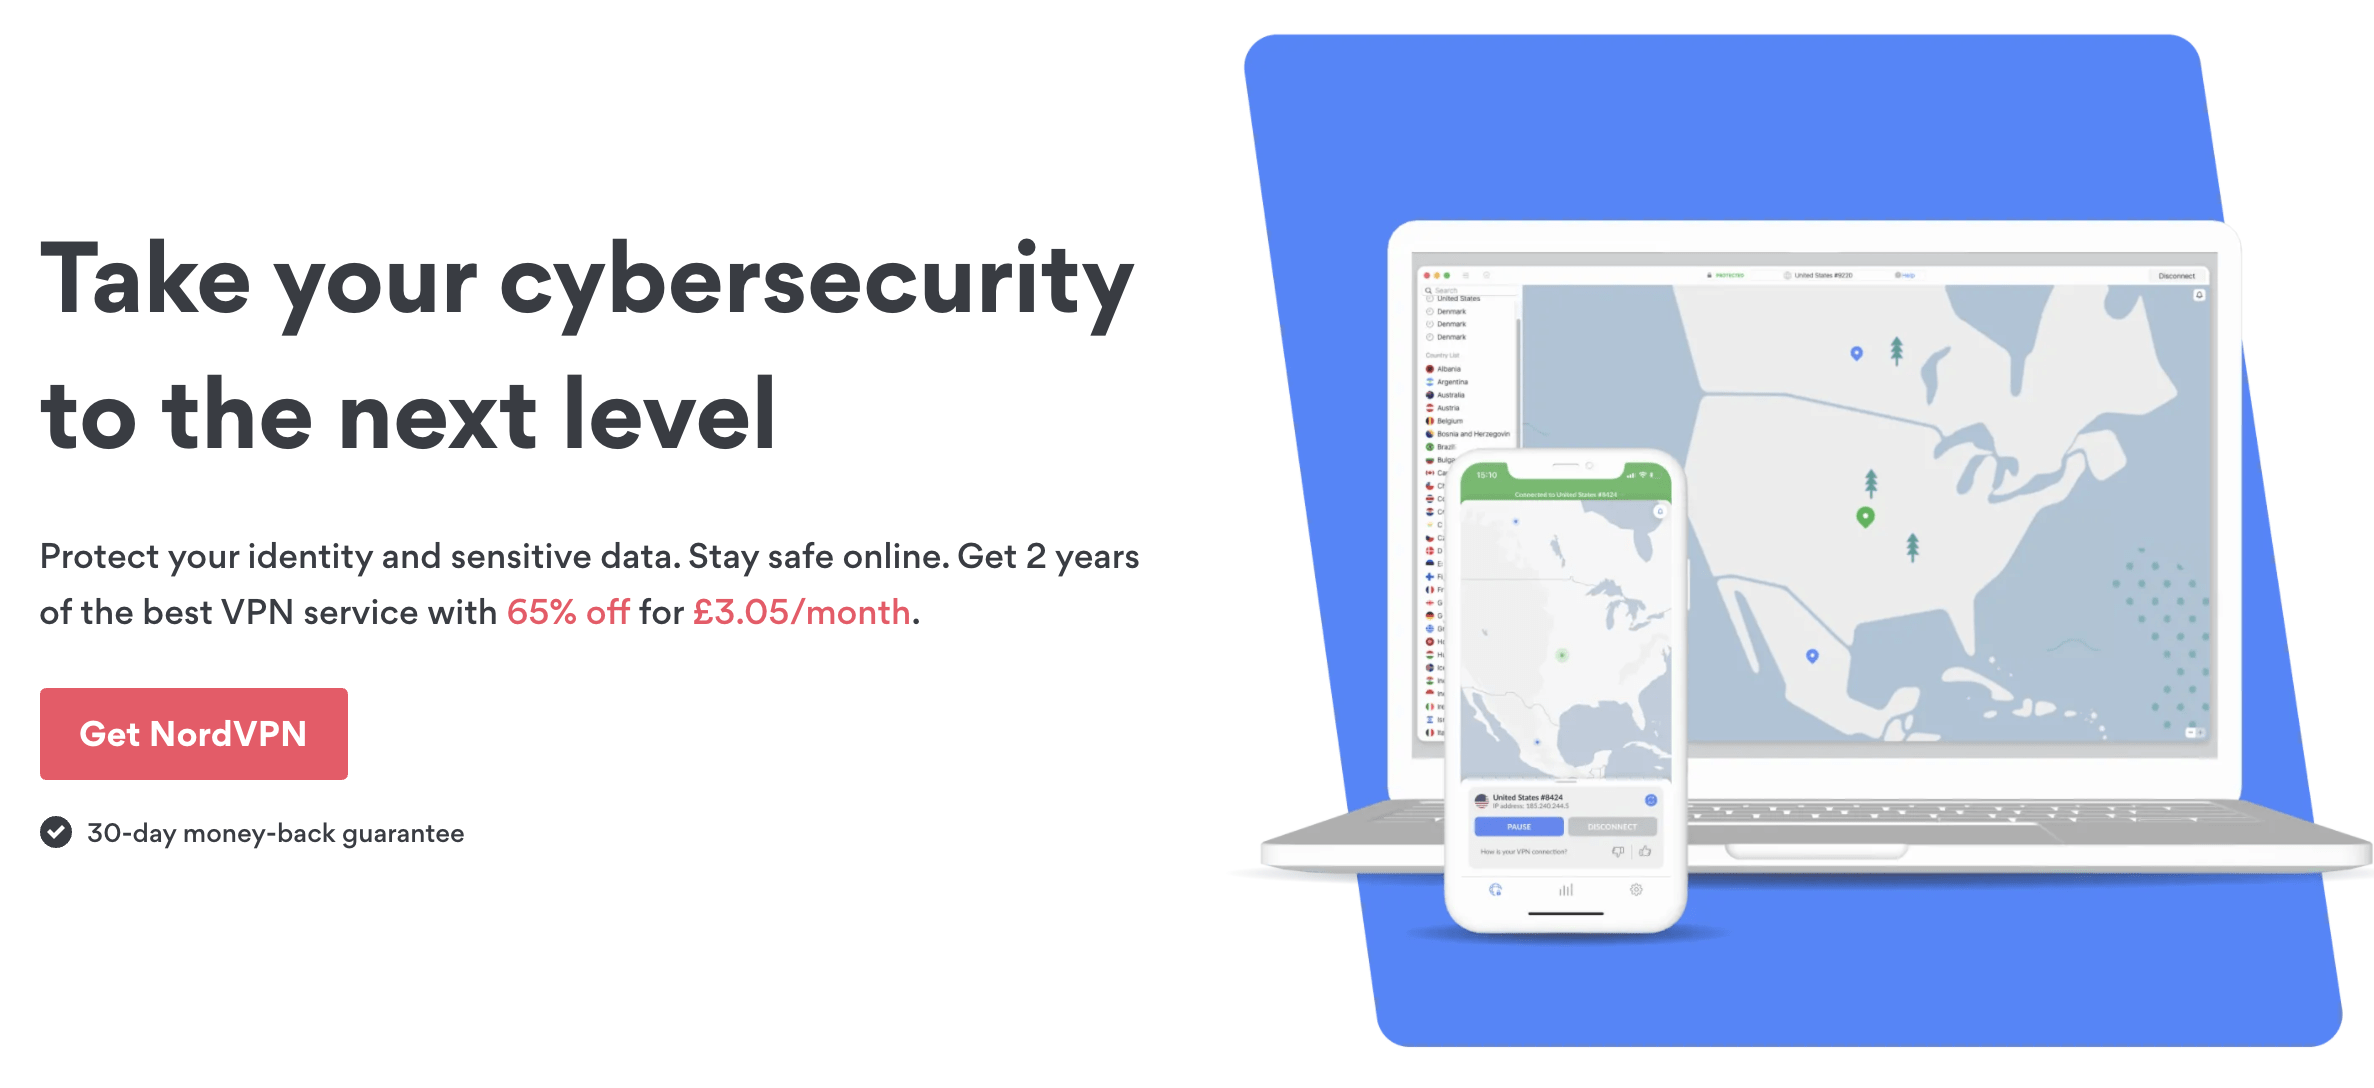 NordVPN Home Page With Deal for their best plan